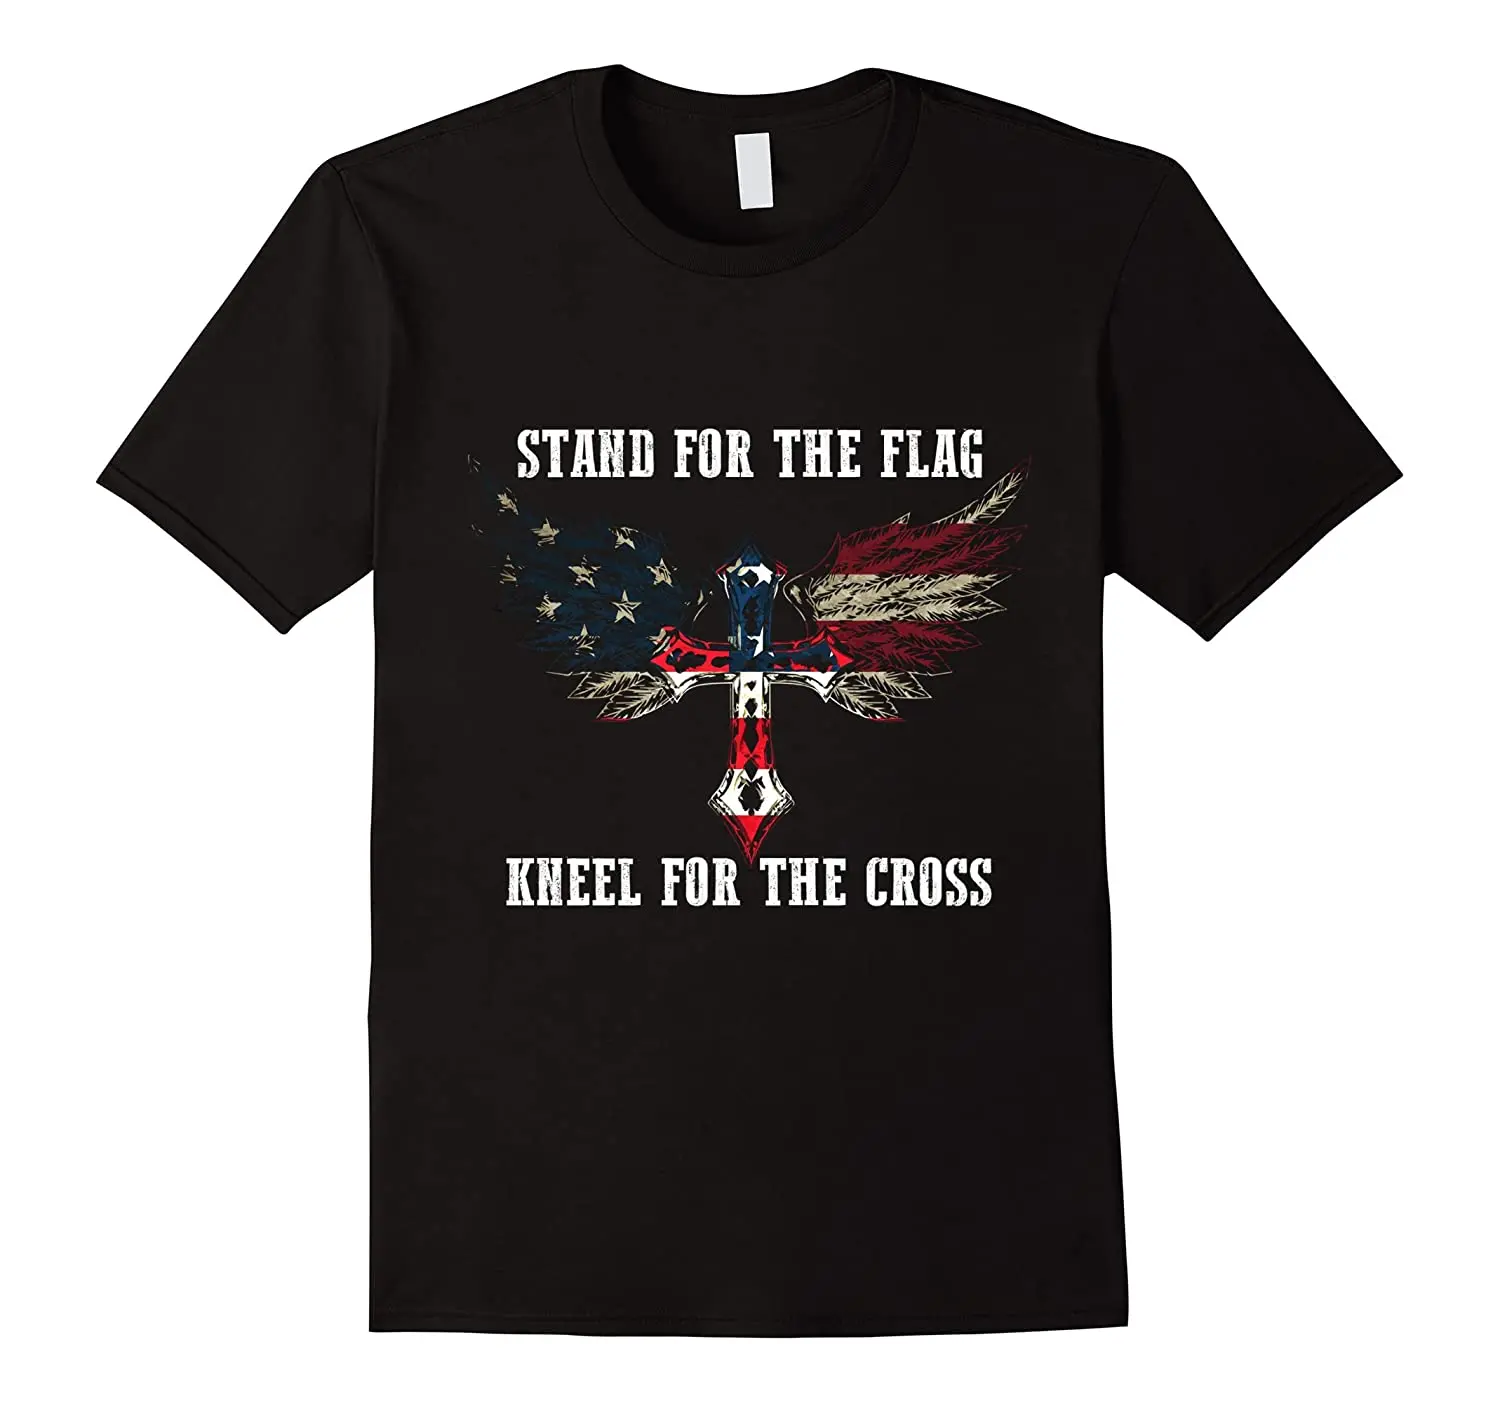 Stand for The Flag, Kneel for The Cross. USA Flag Wings Cross T-Shirt. Summer Cotton Short Sleeve O-Neck Mens T Shirt New S-3XL